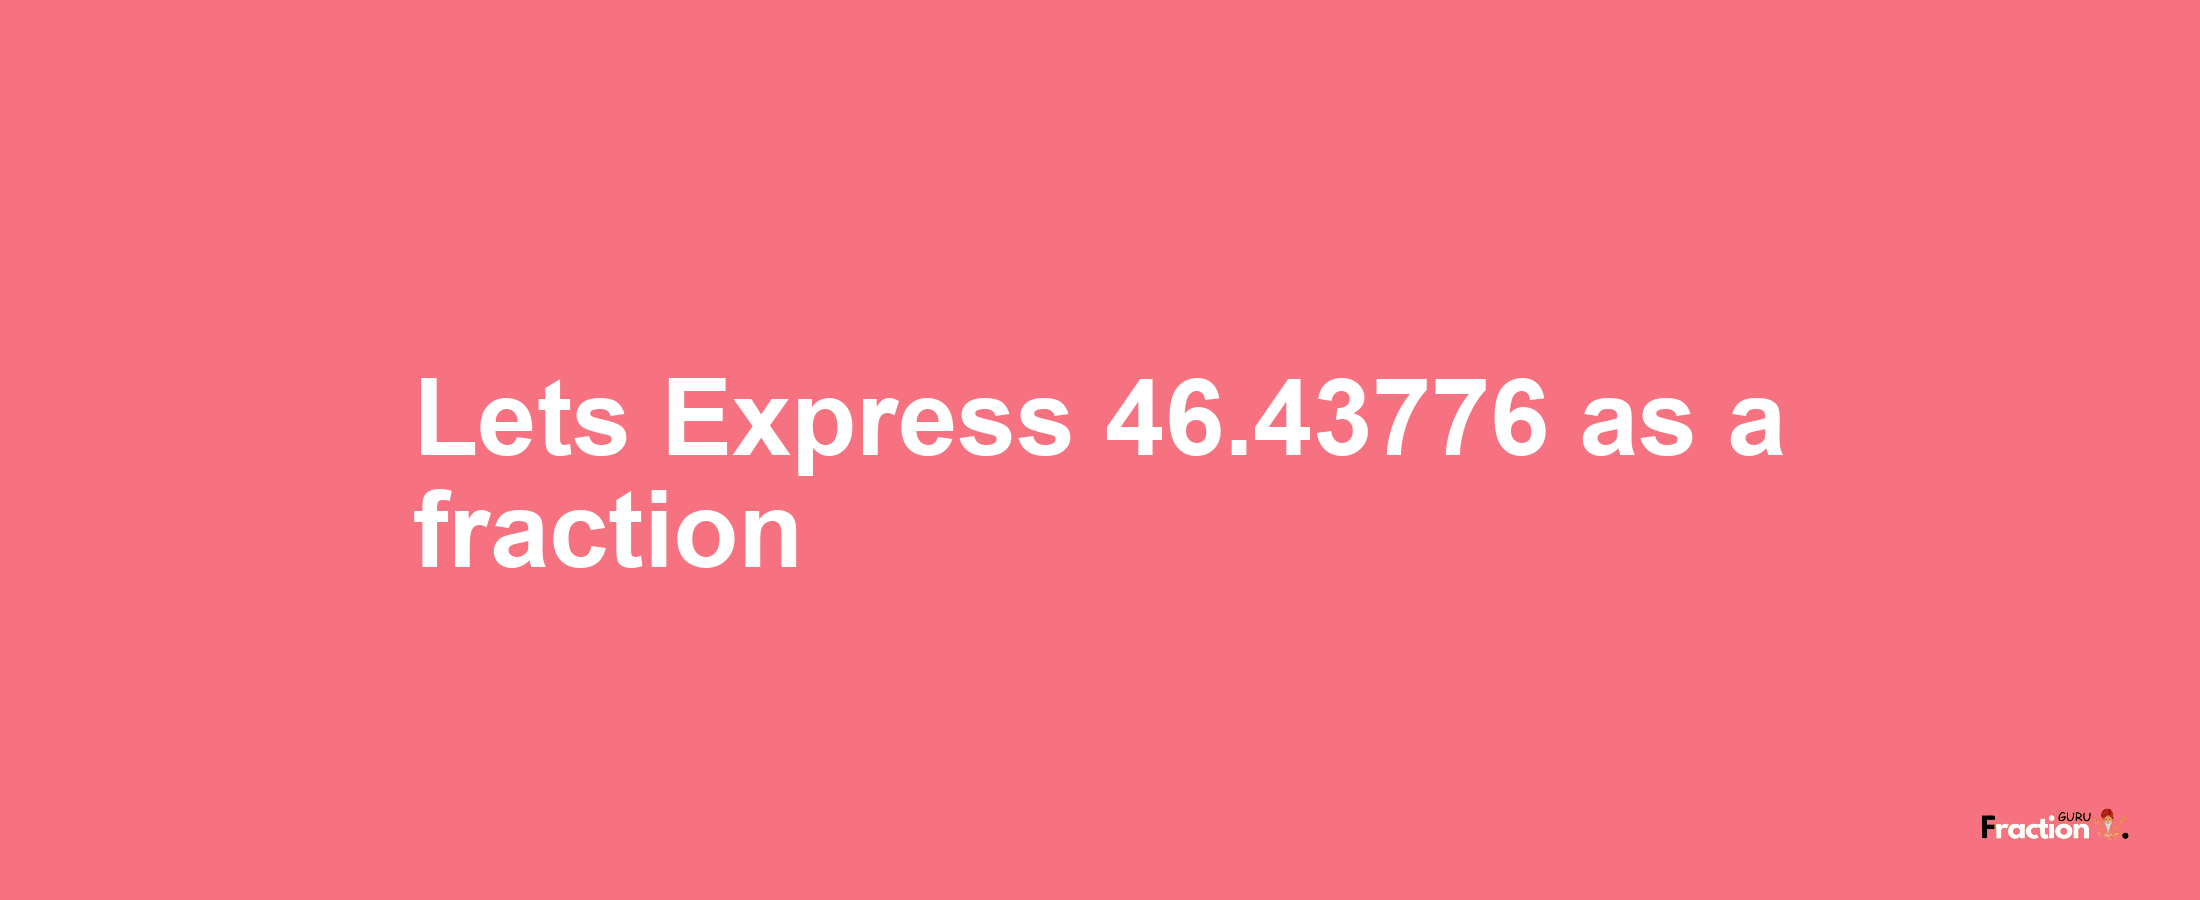 Lets Express 46.43776 as afraction